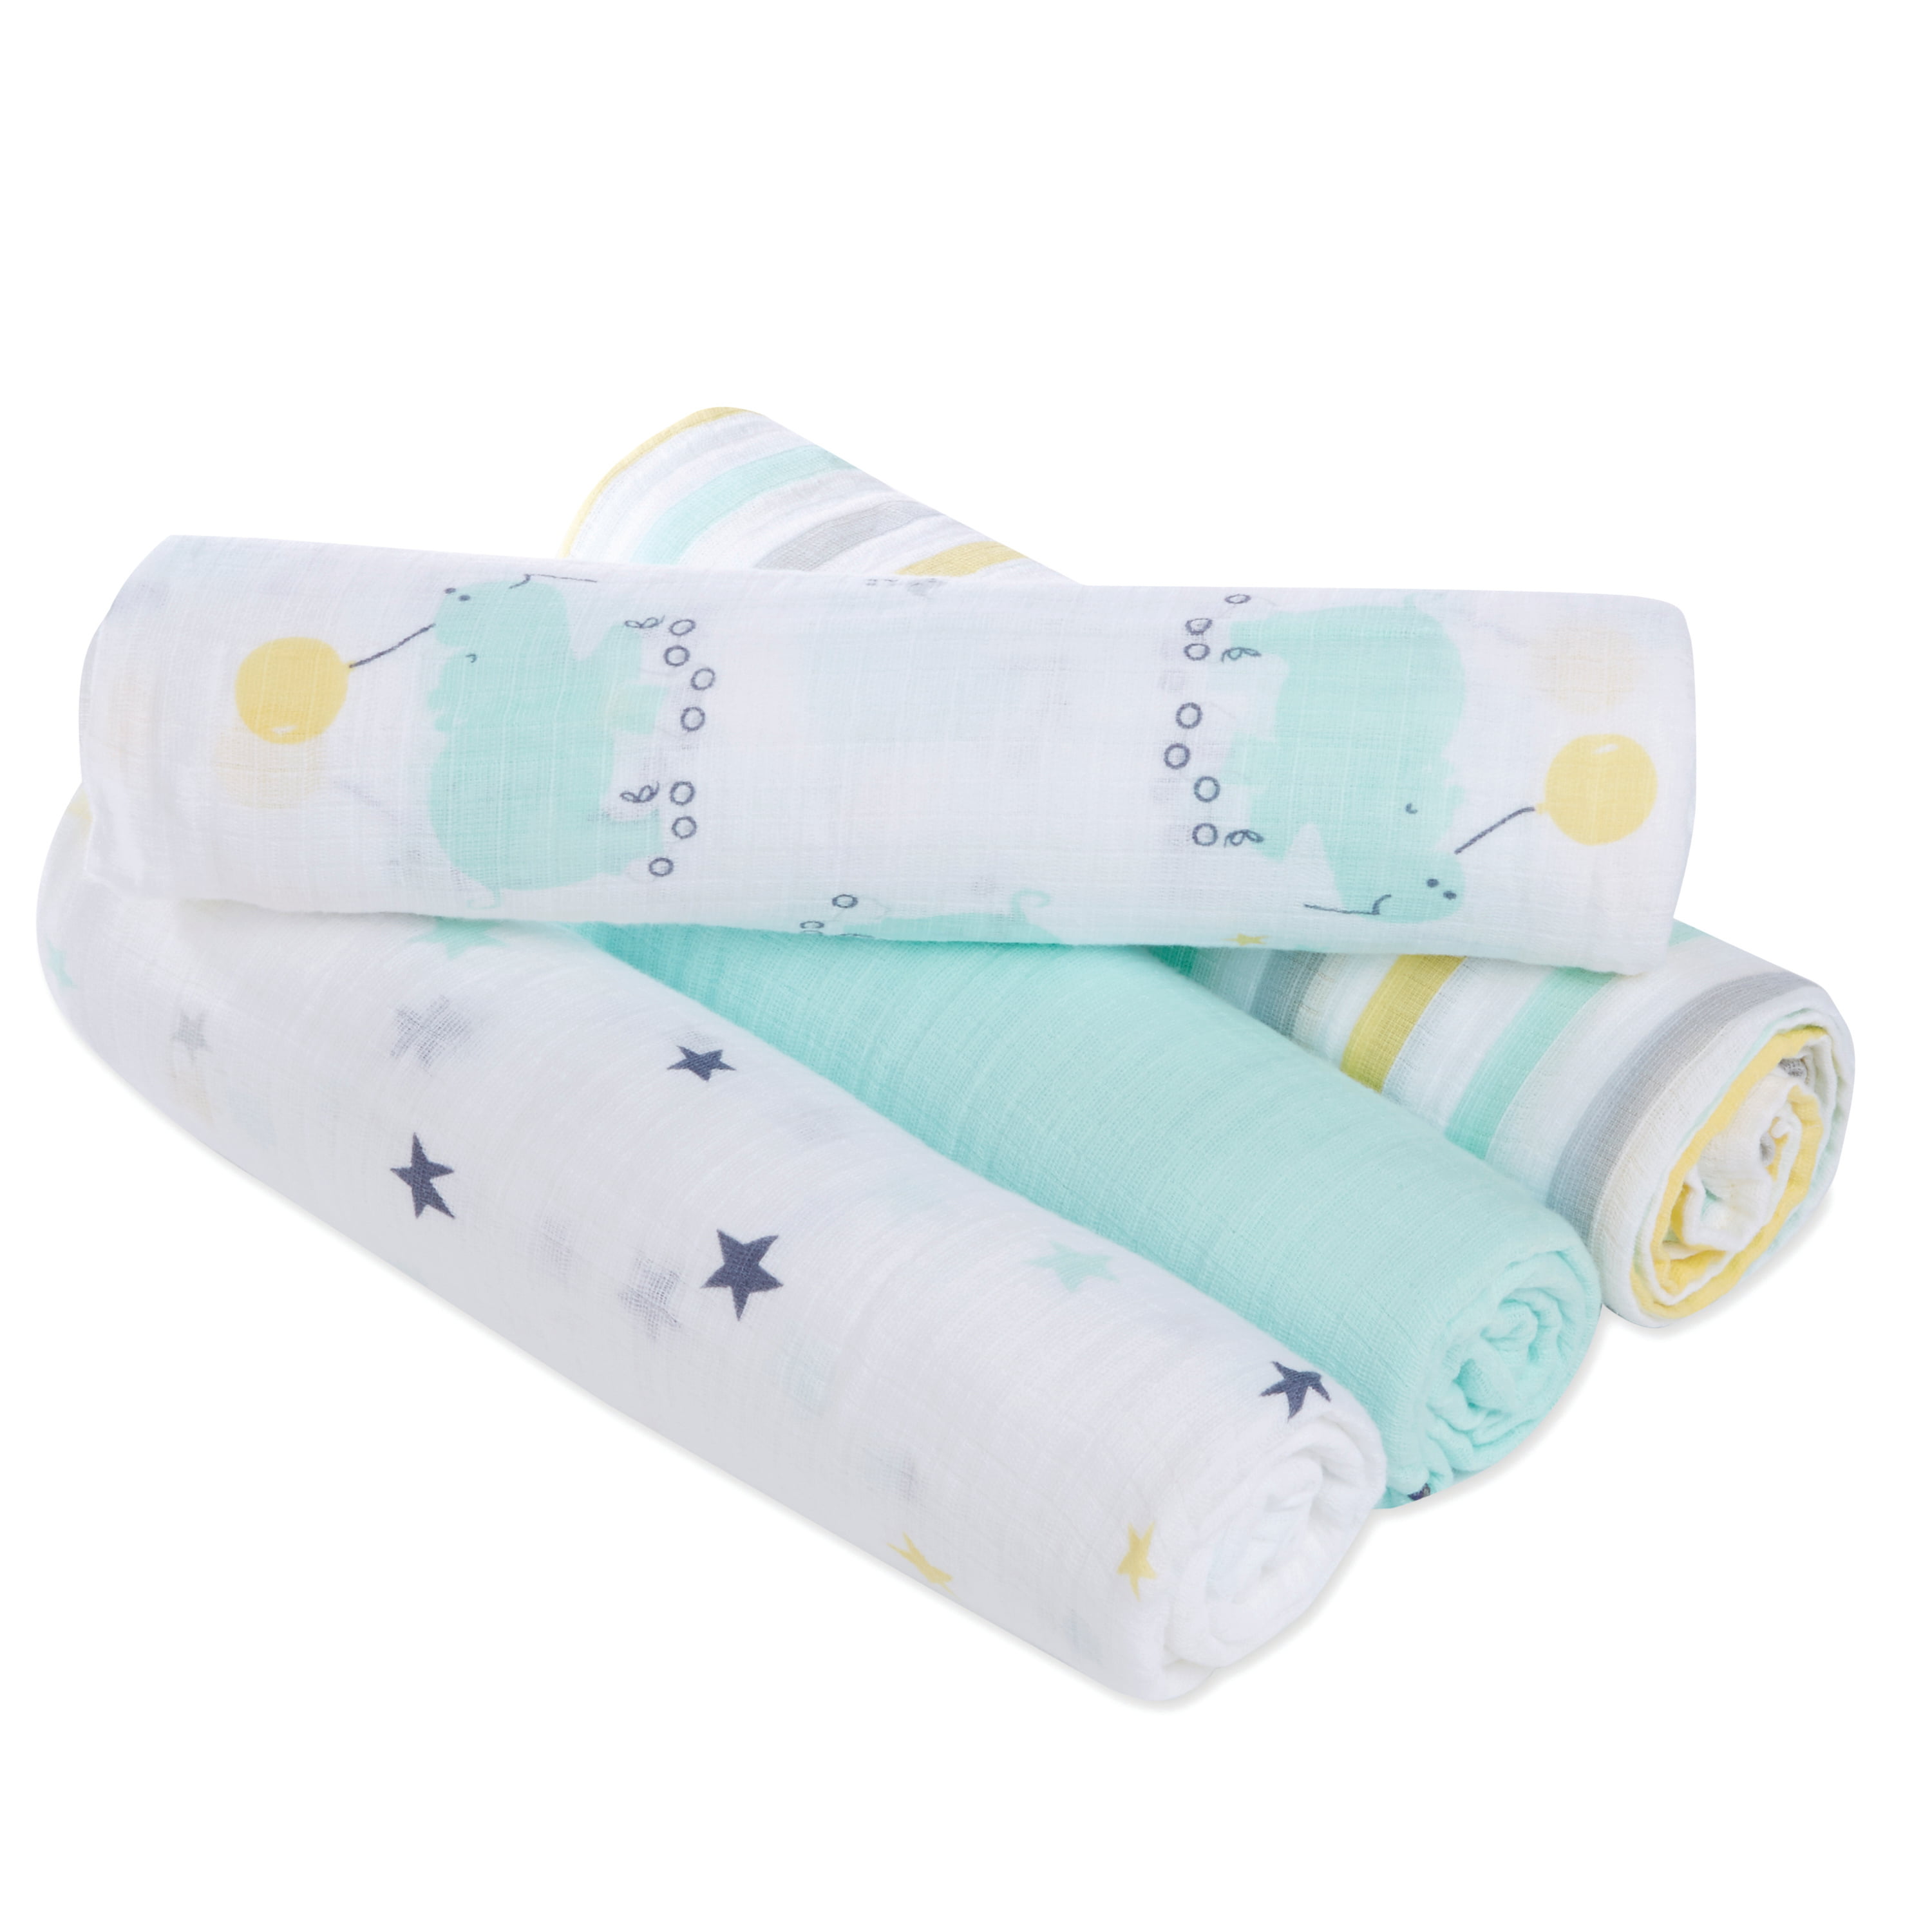 Anais Swaddleplus Multi-Use Muslin Swaddle Baby Blankets Pack of 4 NEW Aden 